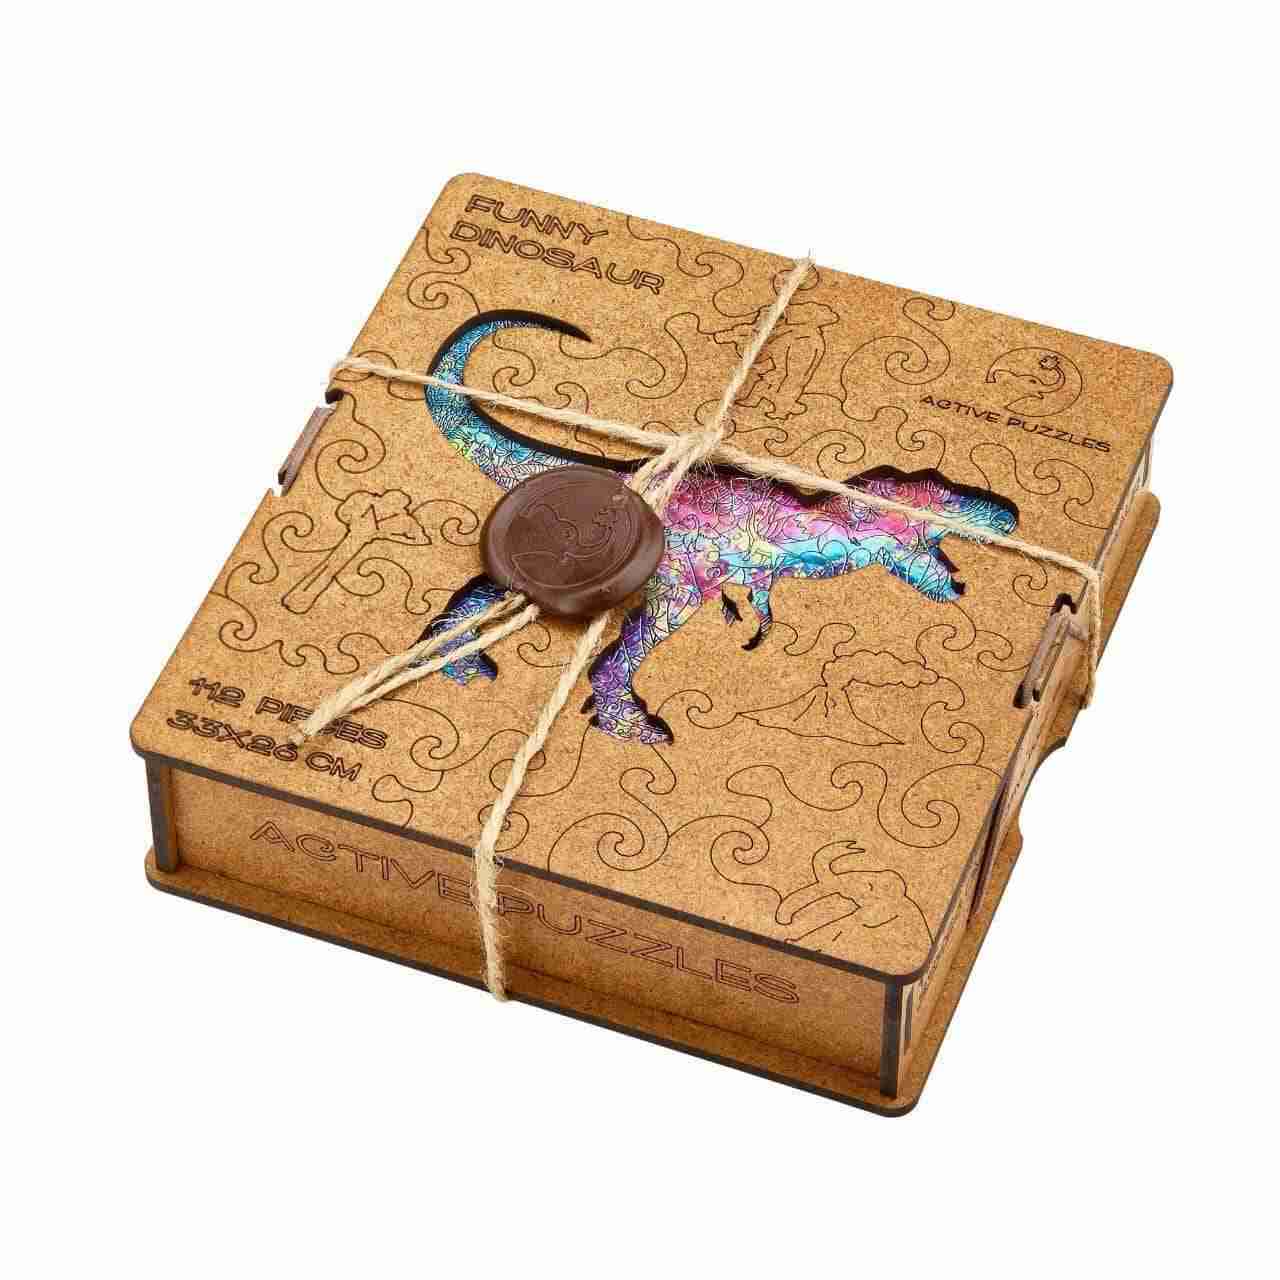 Dinosaur Wooden Puzzle boxing view